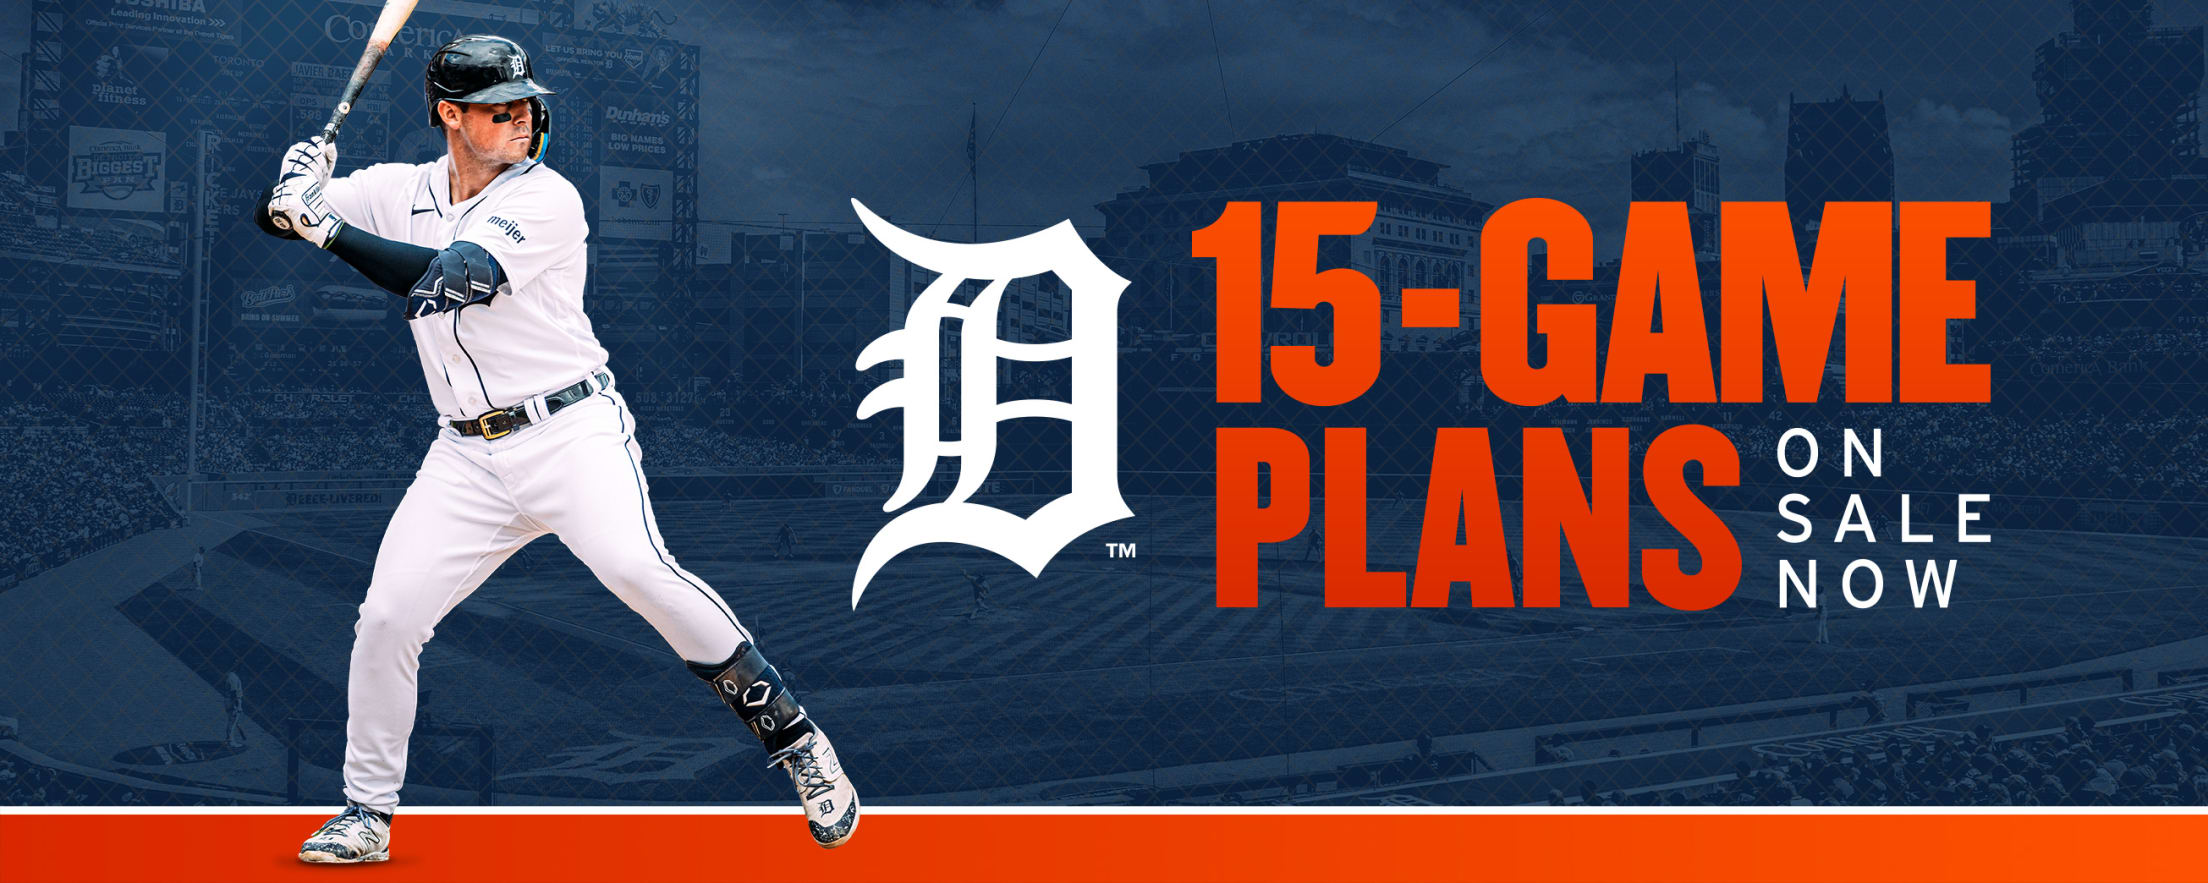 Detroit Tigers - On this day in 1968: The #Tigers win their 3rd